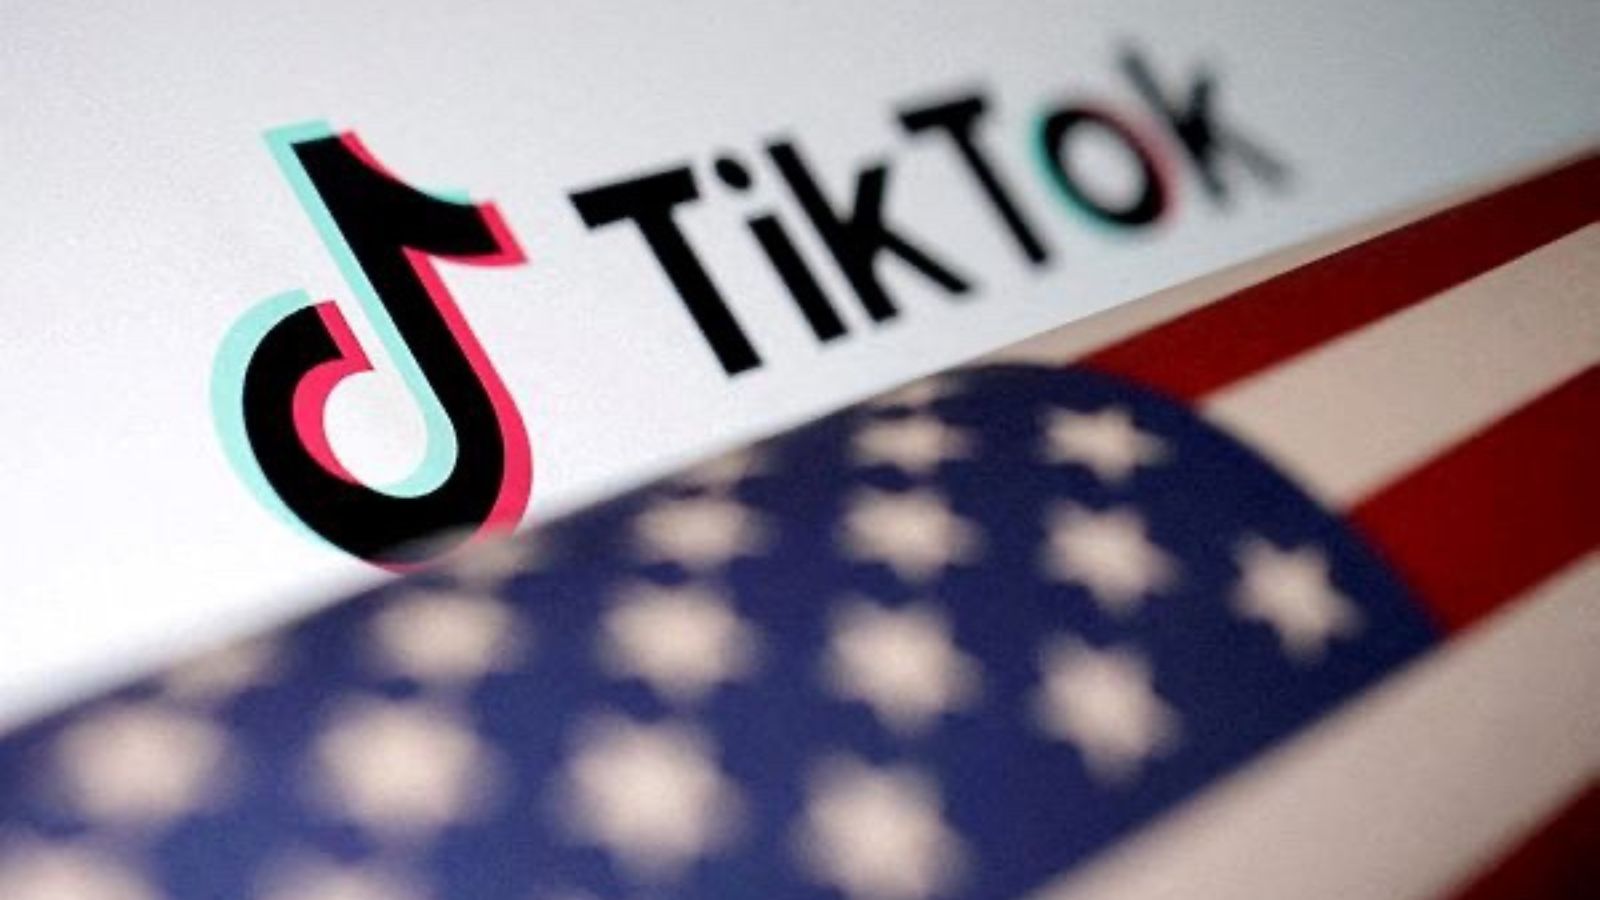 ByteDance is challenging in courts a US law that came into effect in April requiring it to sell TikTok by next January or face a ban. The White House says it wants to see Chinese-based ownership ended on national security grounds, but not a ban on TikTok. Trump